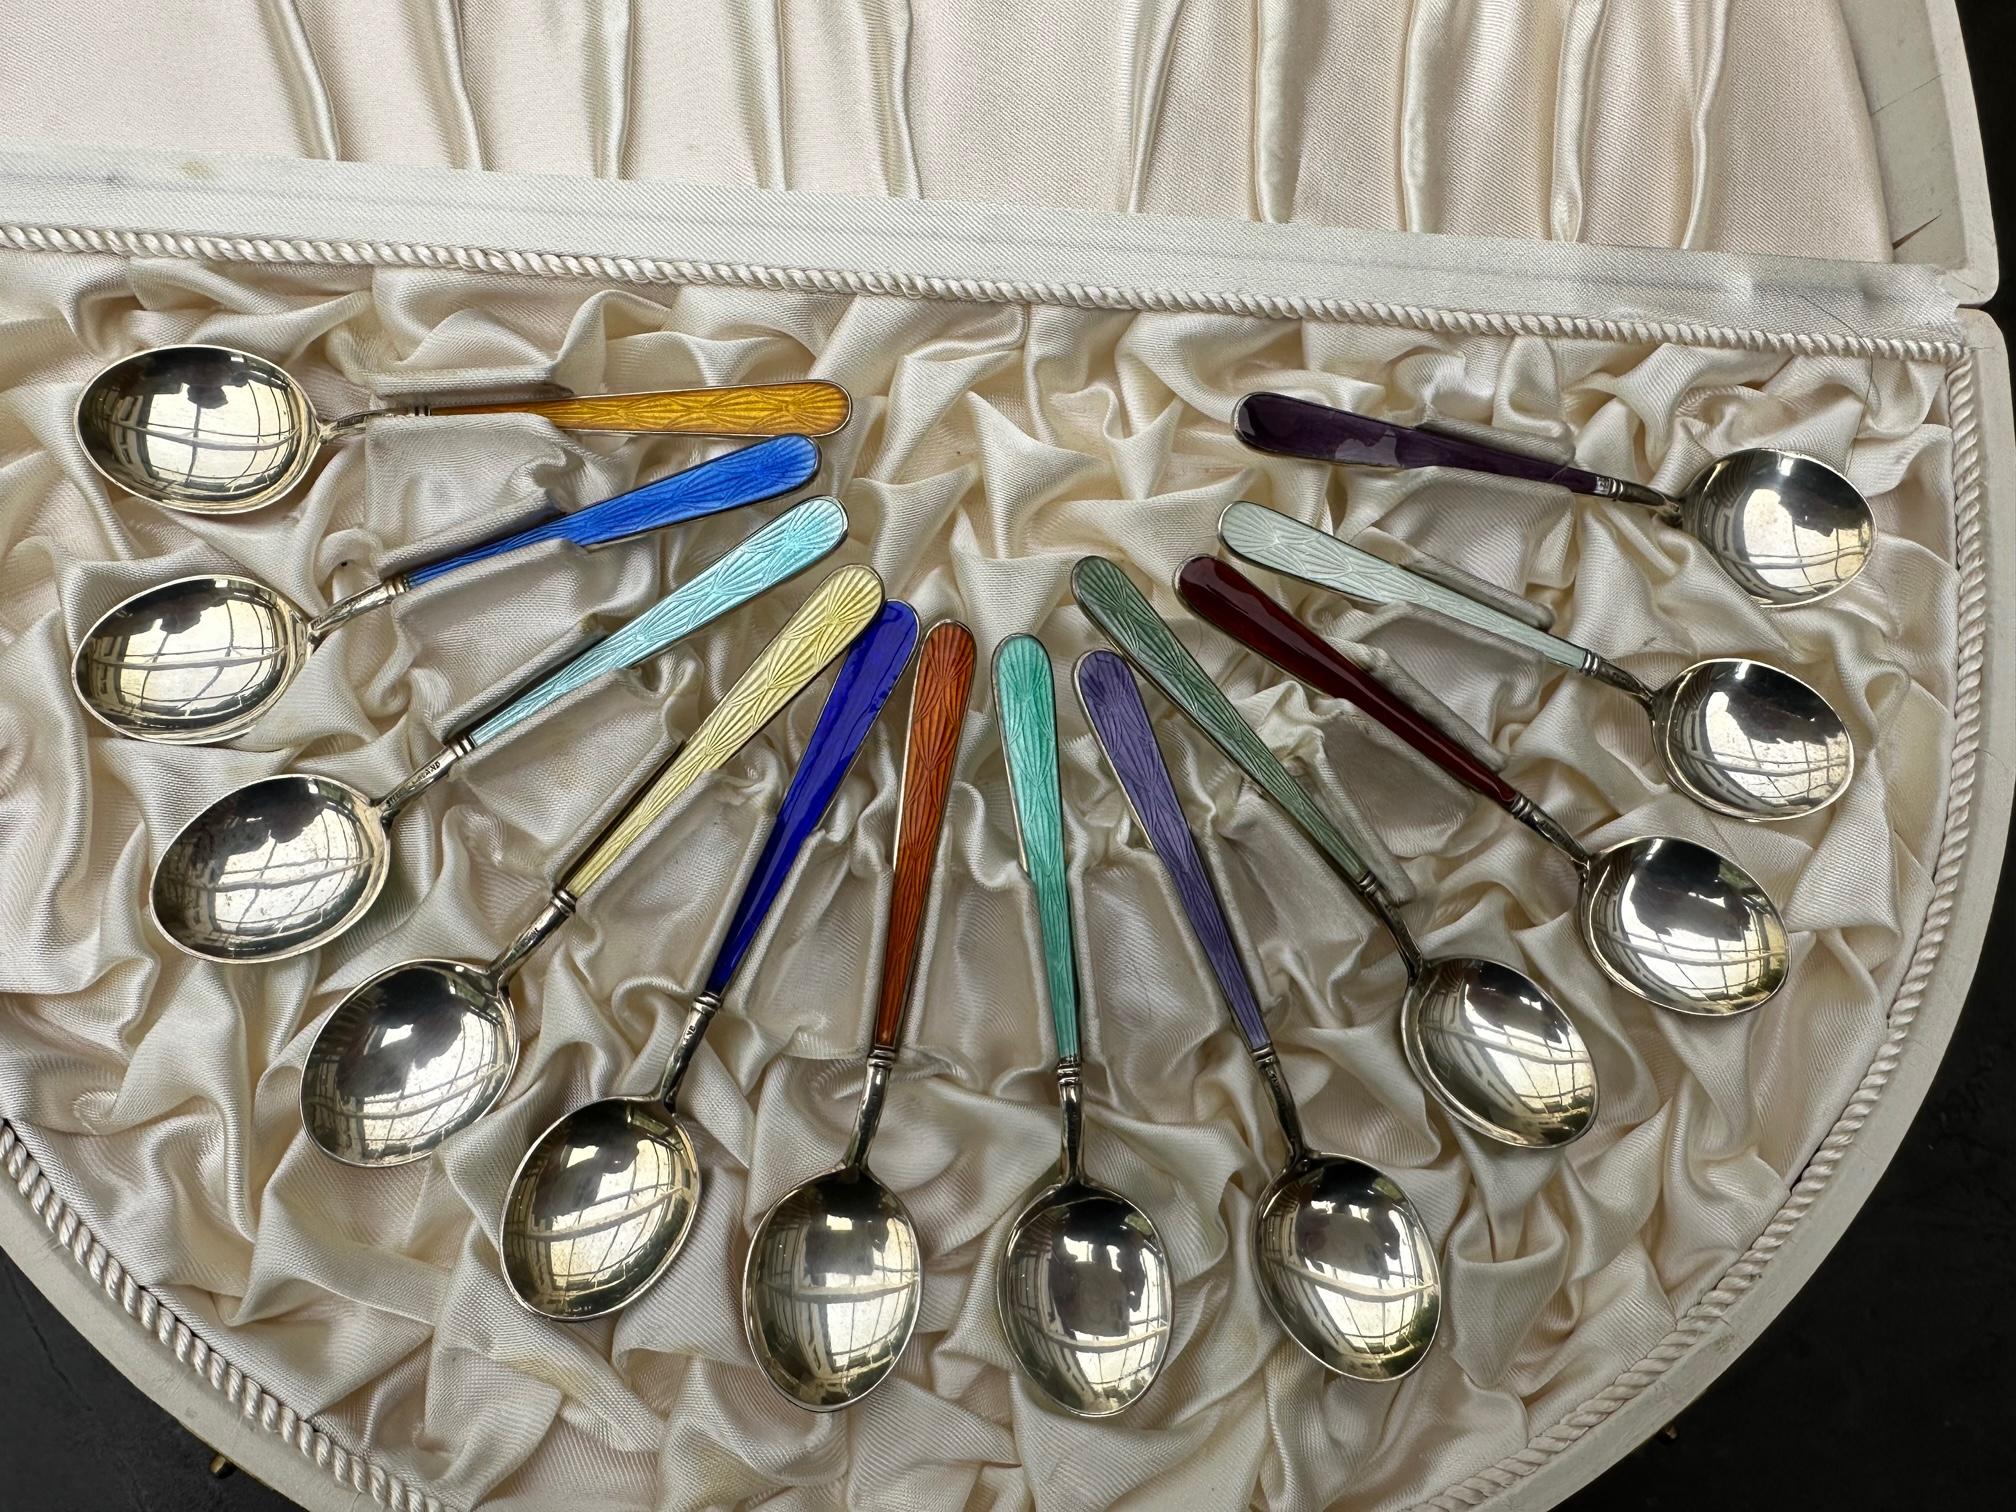 Tillander gold plated silver mocha spoons with enamel coding (length 10 cm).  These are the most beautiful mocha / coffee spoons available.  Beautiful workmanship by Tillander Jewelry Company which used to be a supplier for the Russian Imperial